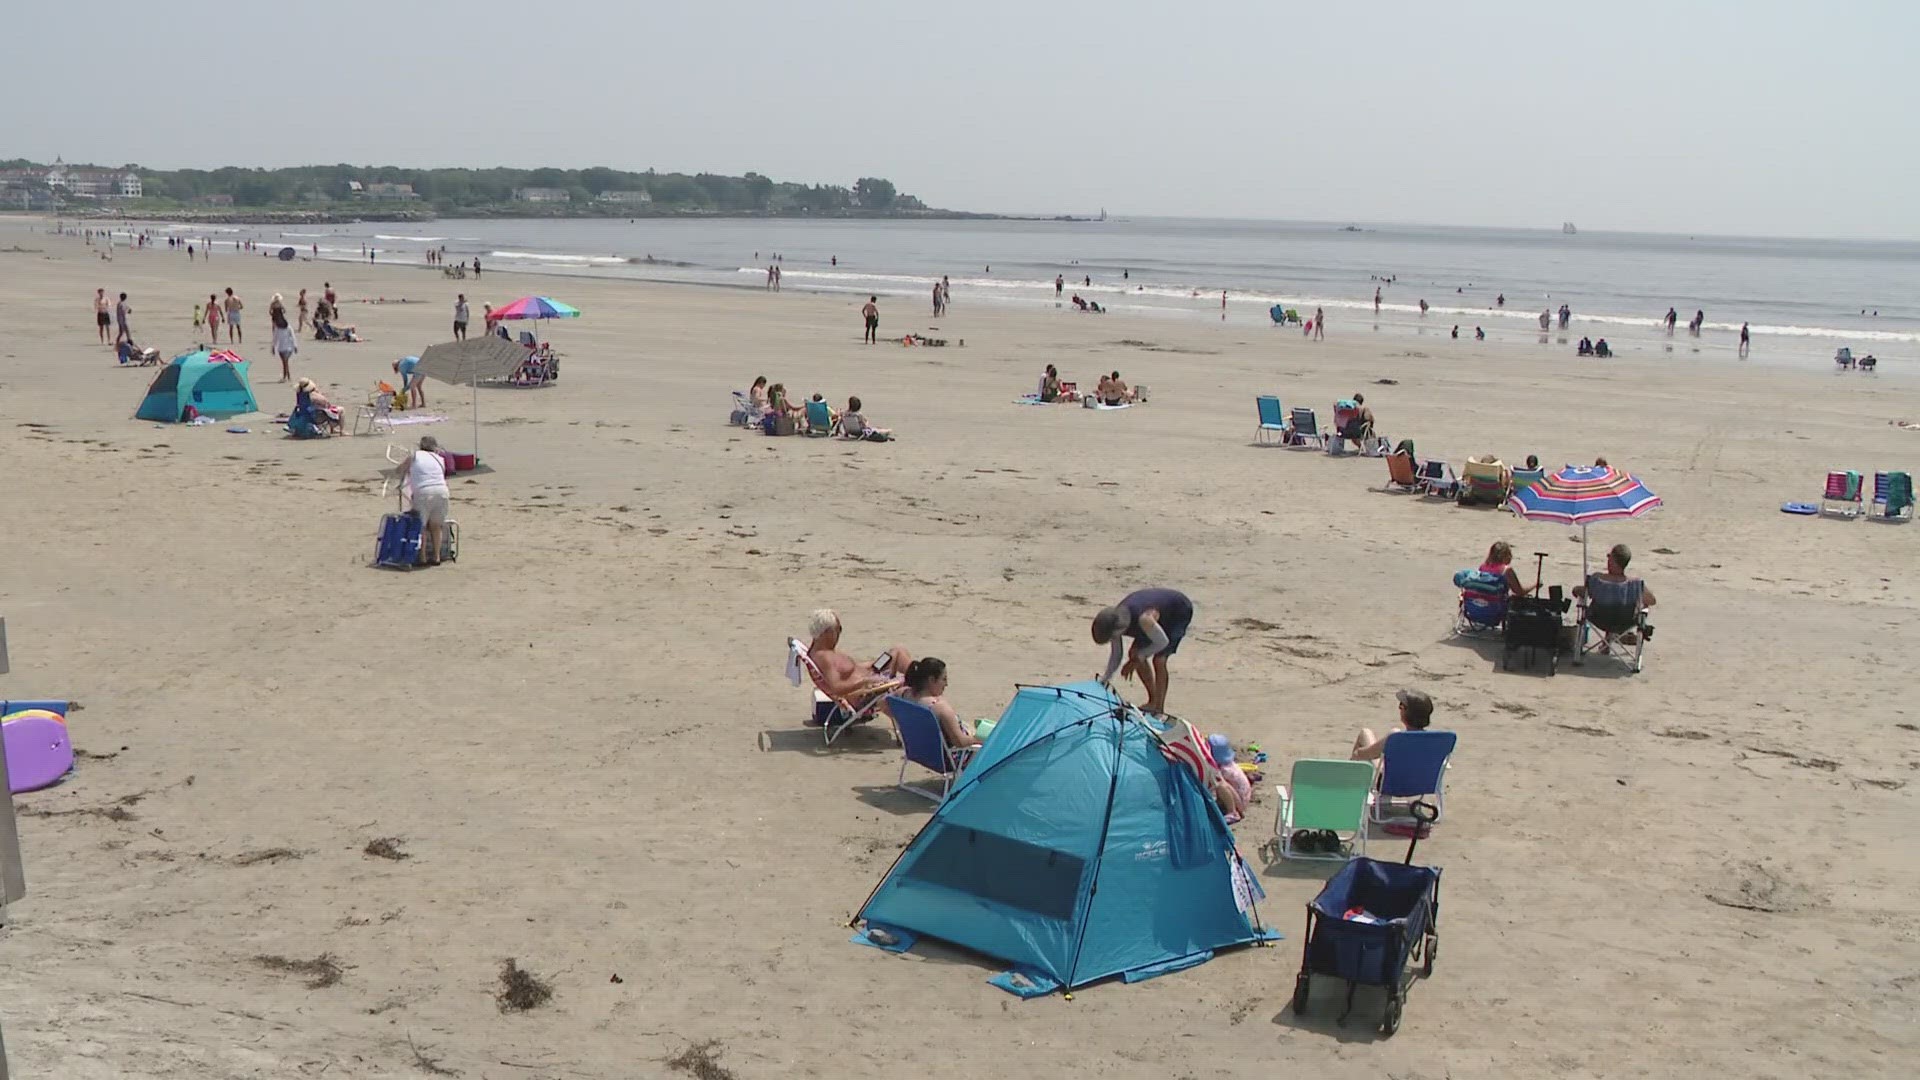 State testing has revealed high levels of bacterial contamination at several beaches in the area.